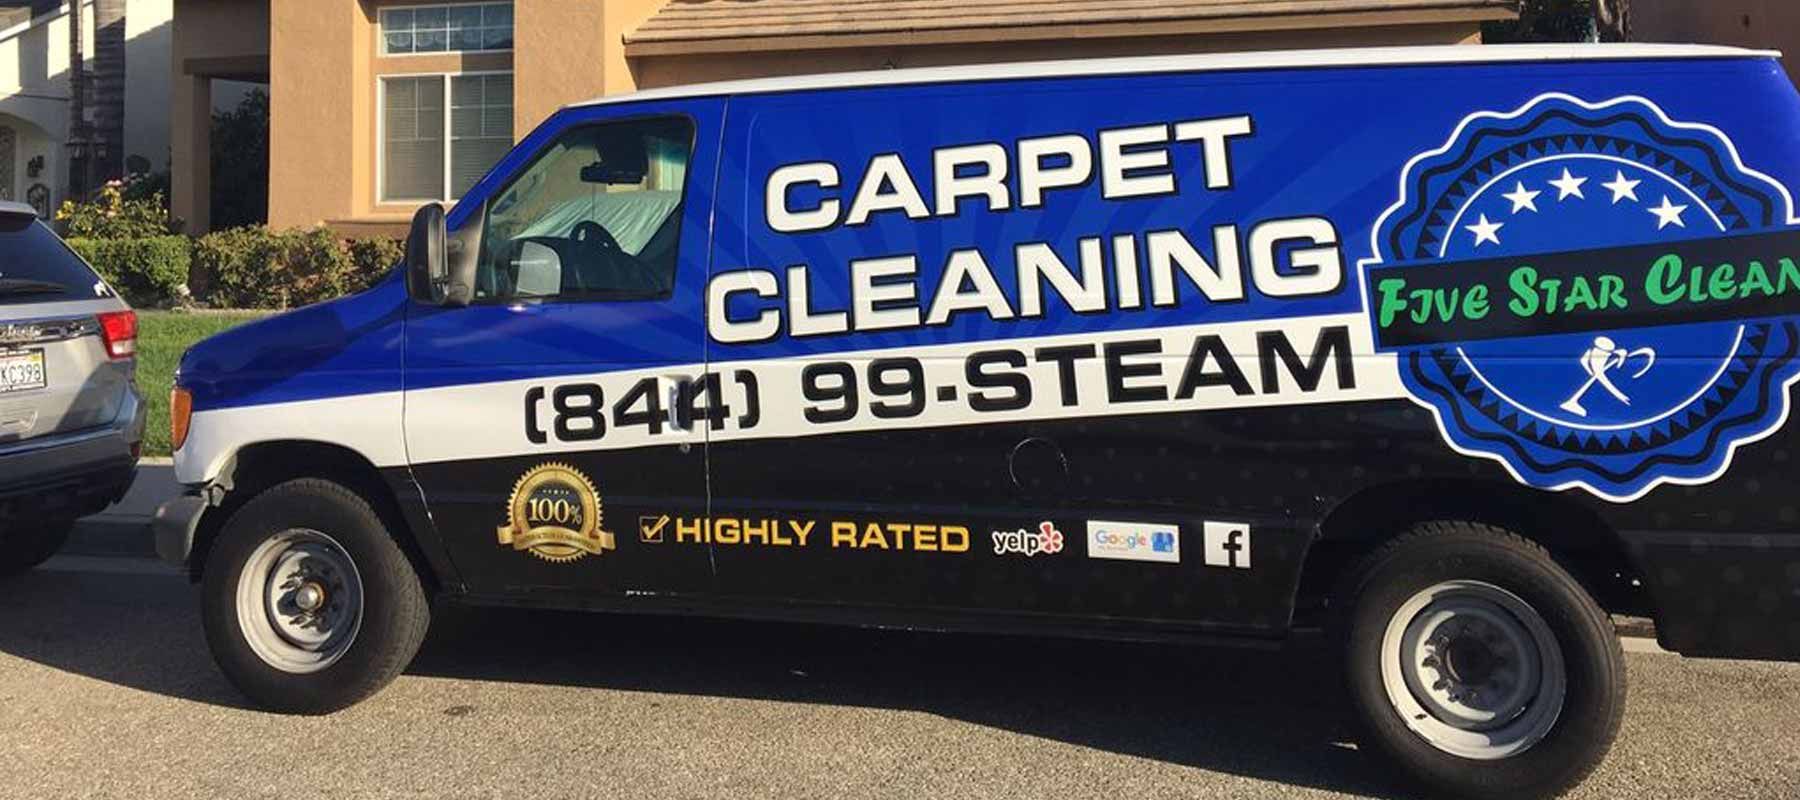 Five Star Carpet Cleaning in Azusa